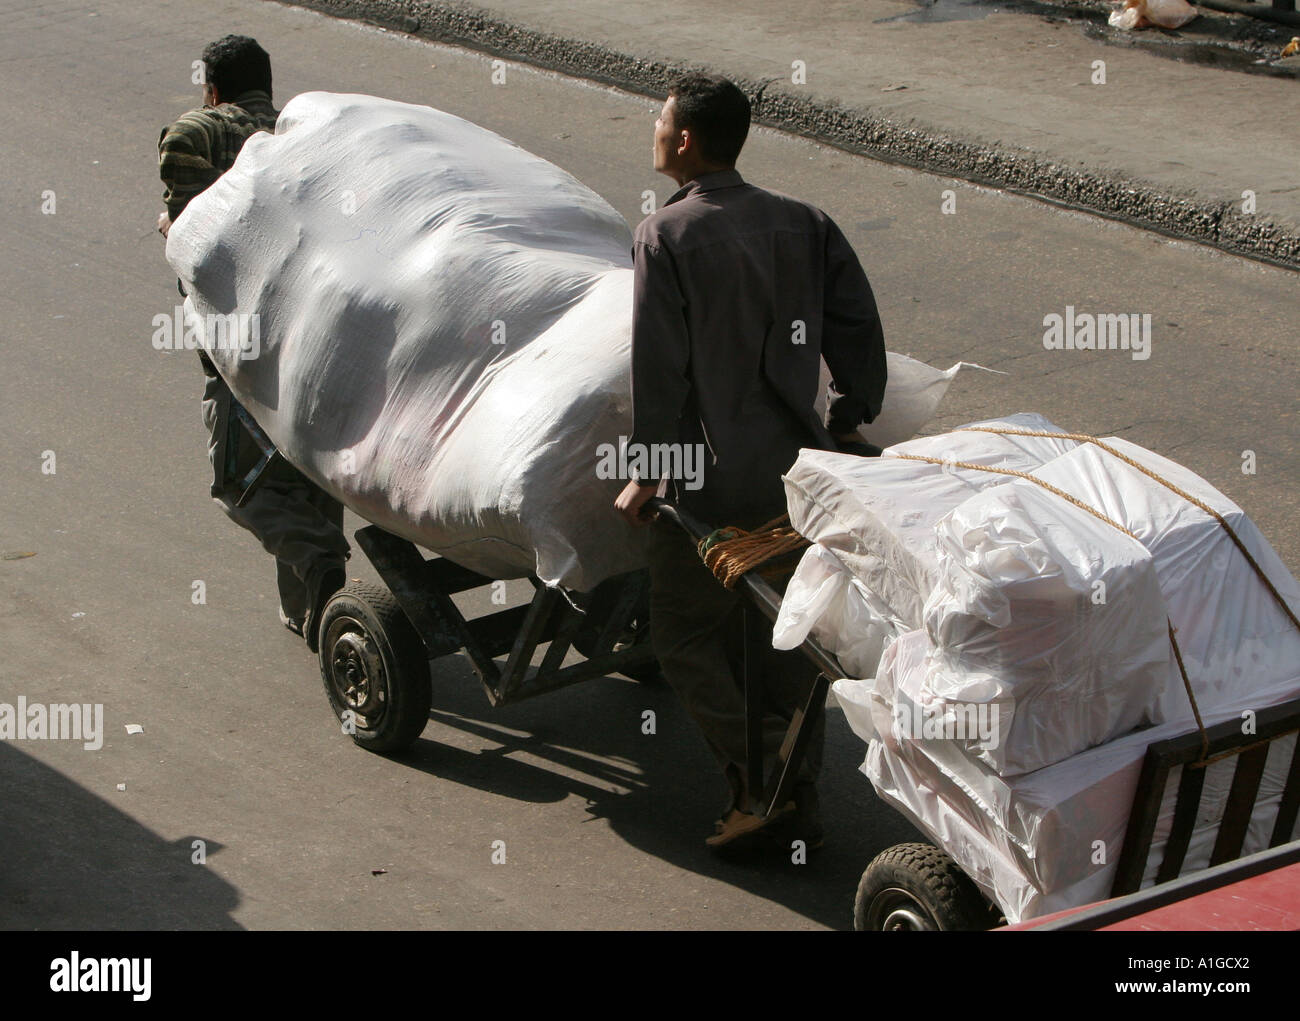 Men deliver goods by hand in Cairo,Egypt Stock Photo